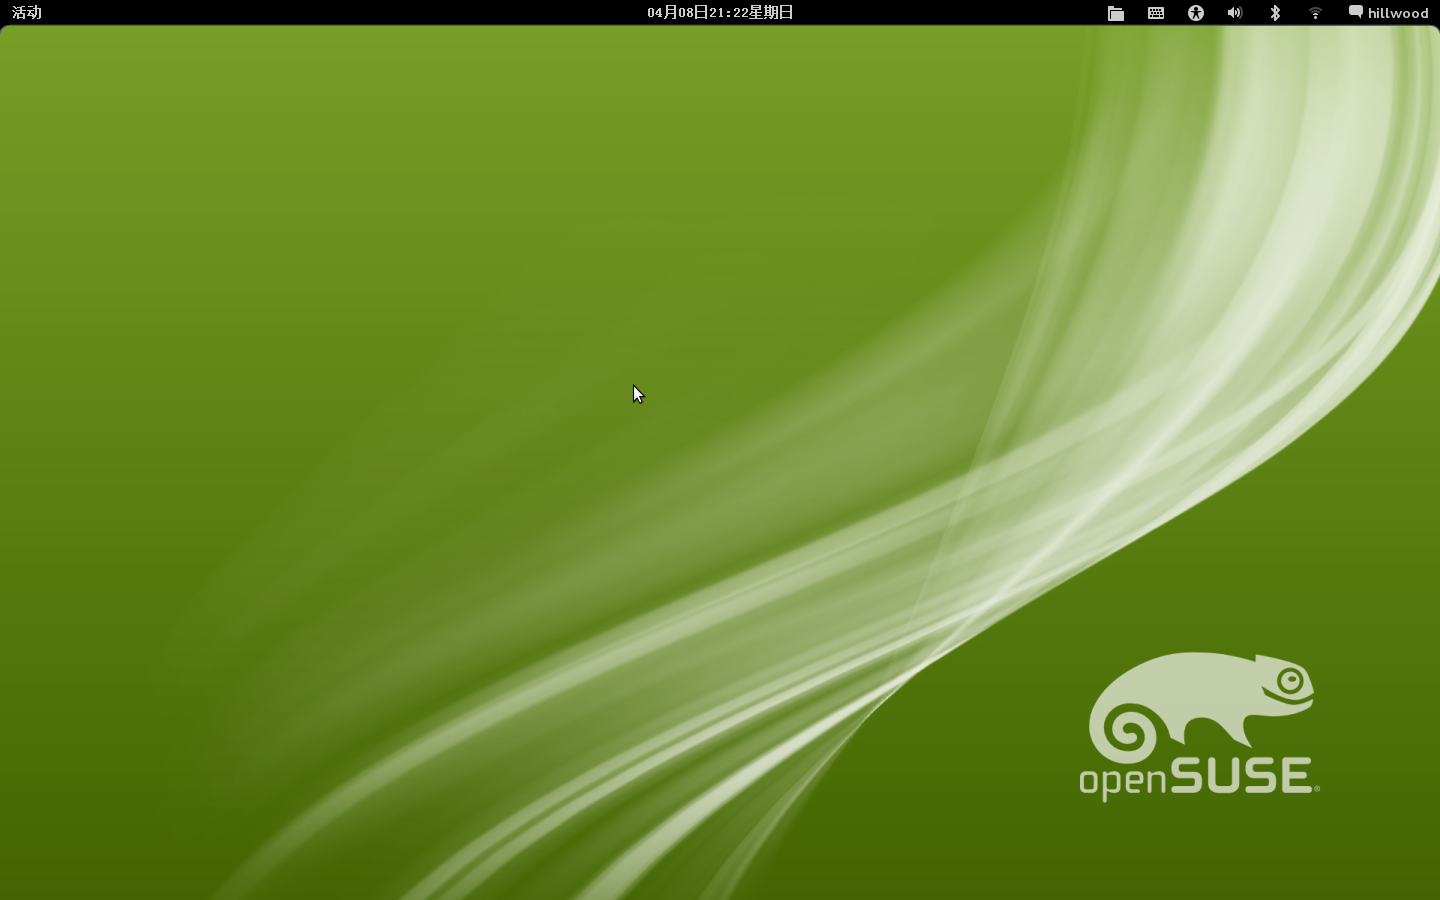 OpenSUSE 12.1 GNOME desktop.png